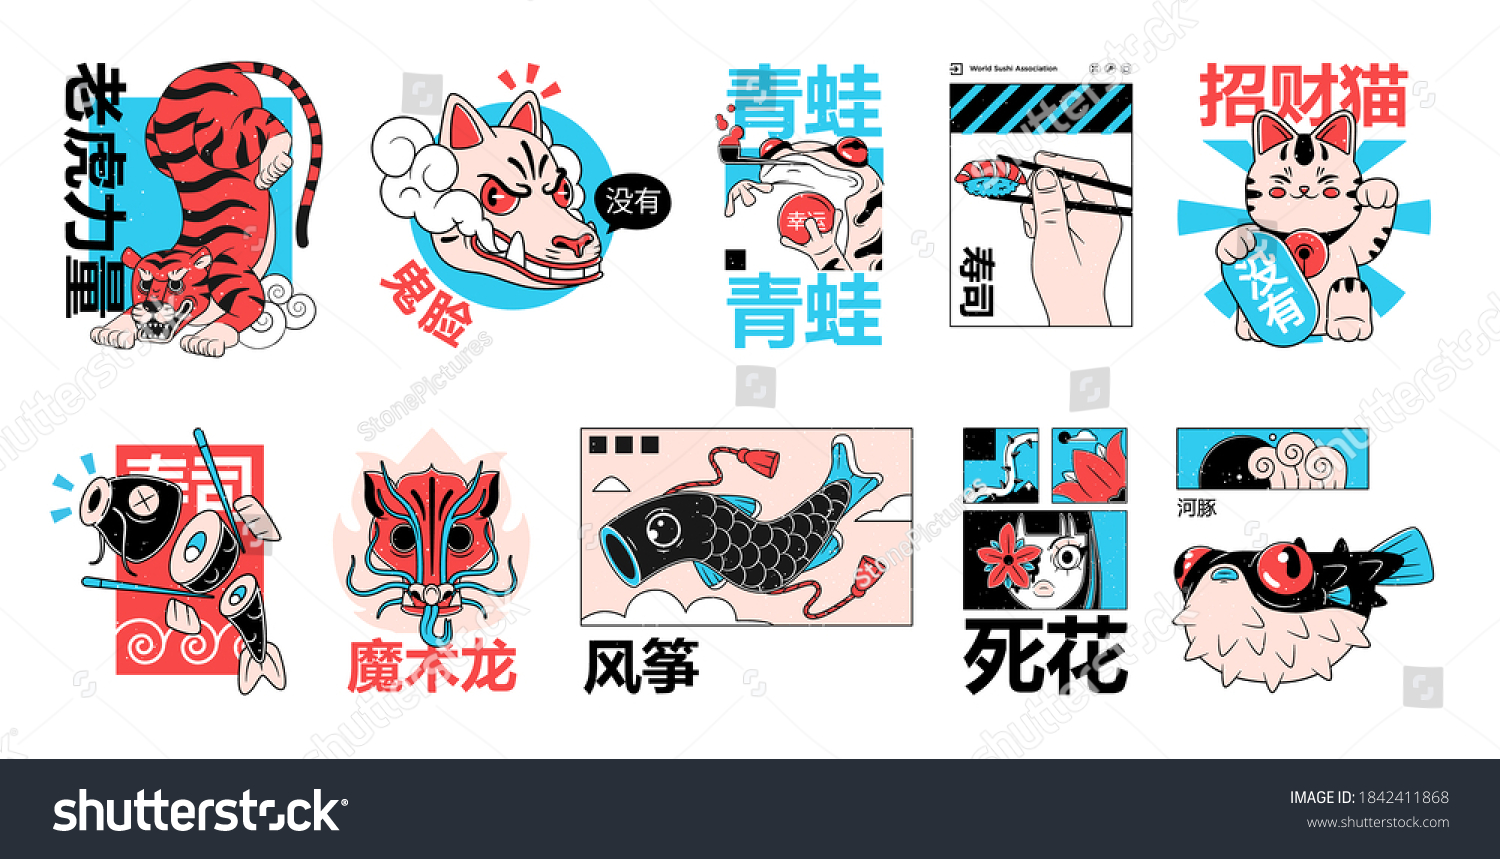 SVG of Illustration of cooking fish in traditional asian style. Ideal for oriental restaurant or souvenirs. Hieroglyphs translation: sushi, lucky cat, pufferfish, kite, frog, luck, dead flower, grimace, no svg